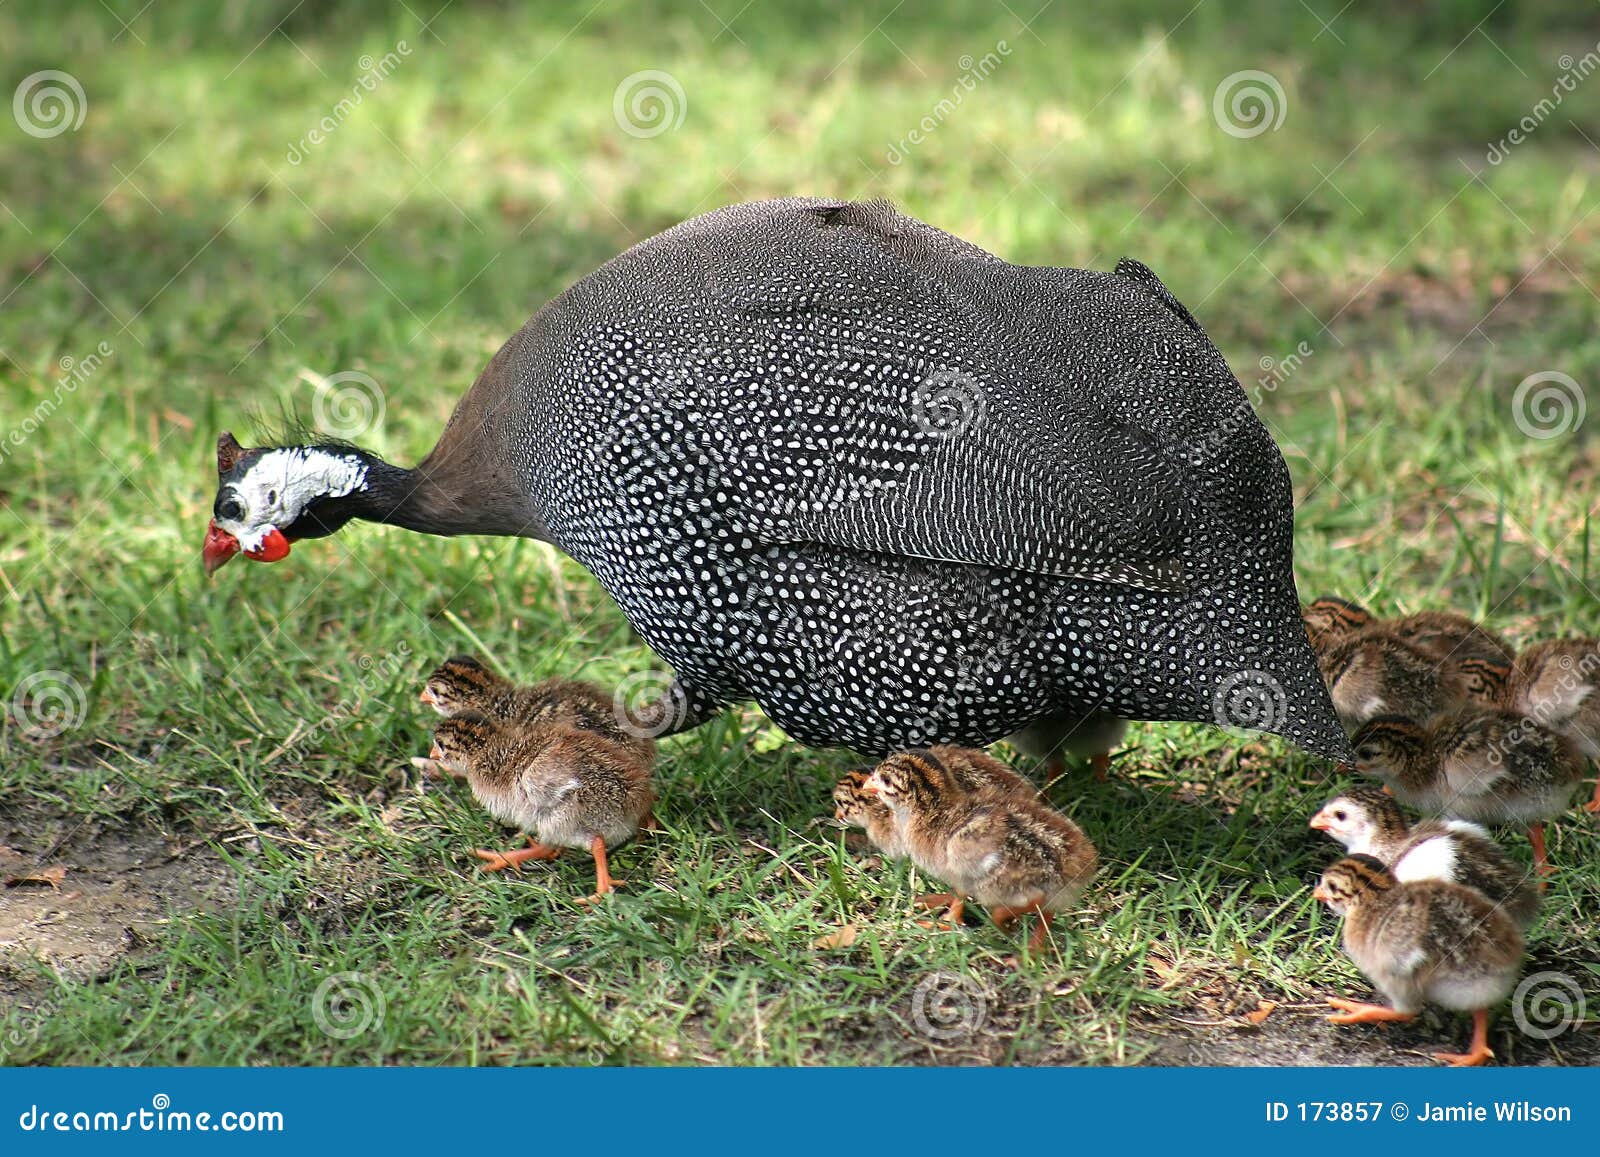 guineafowl and chicks